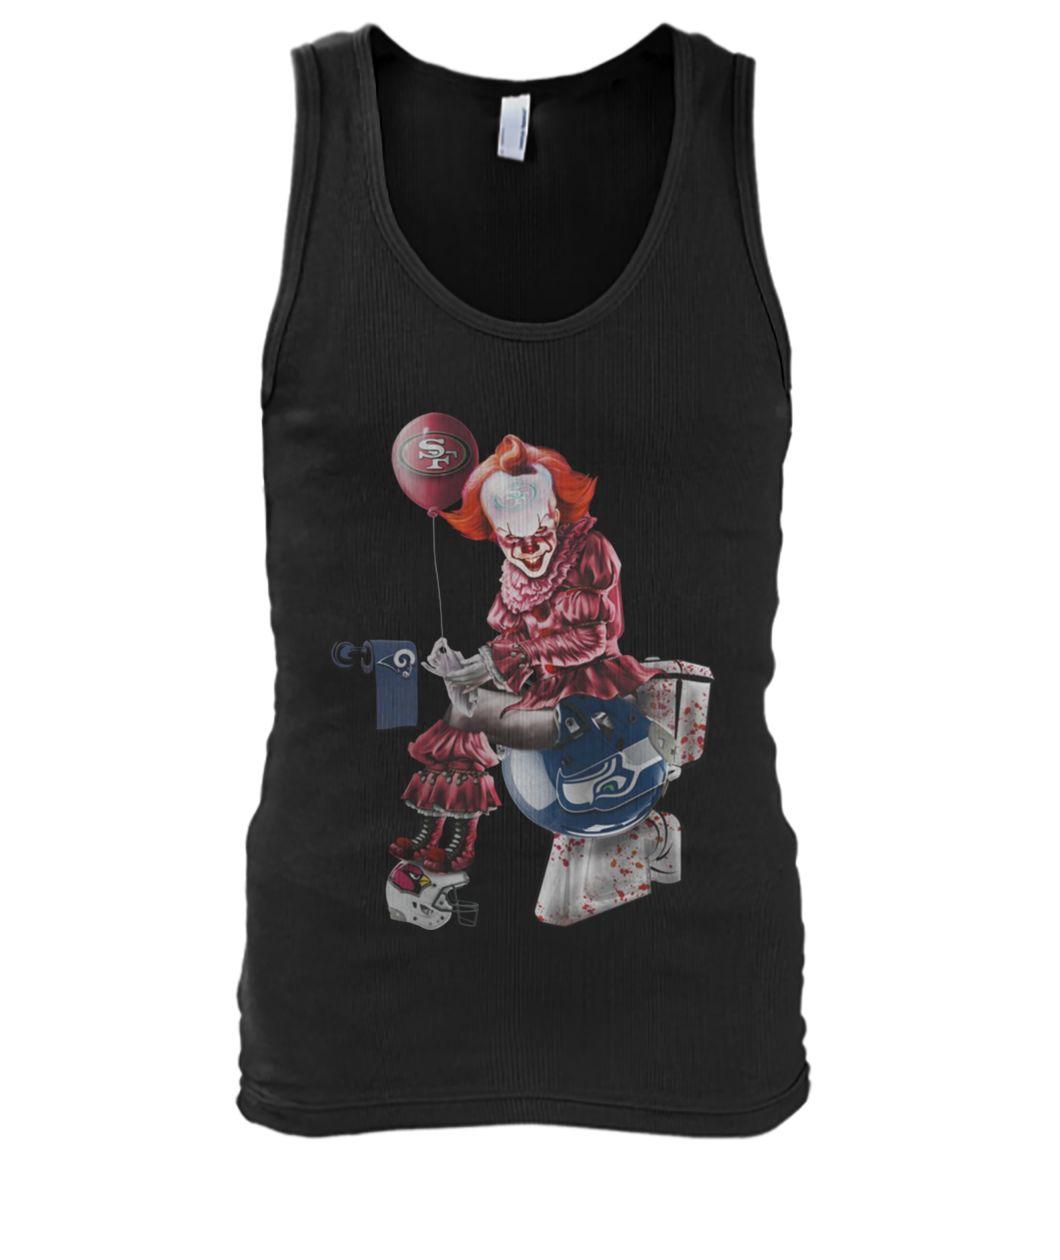 It pennywise san francisco 49ers sitting on seattle seahawks tank top